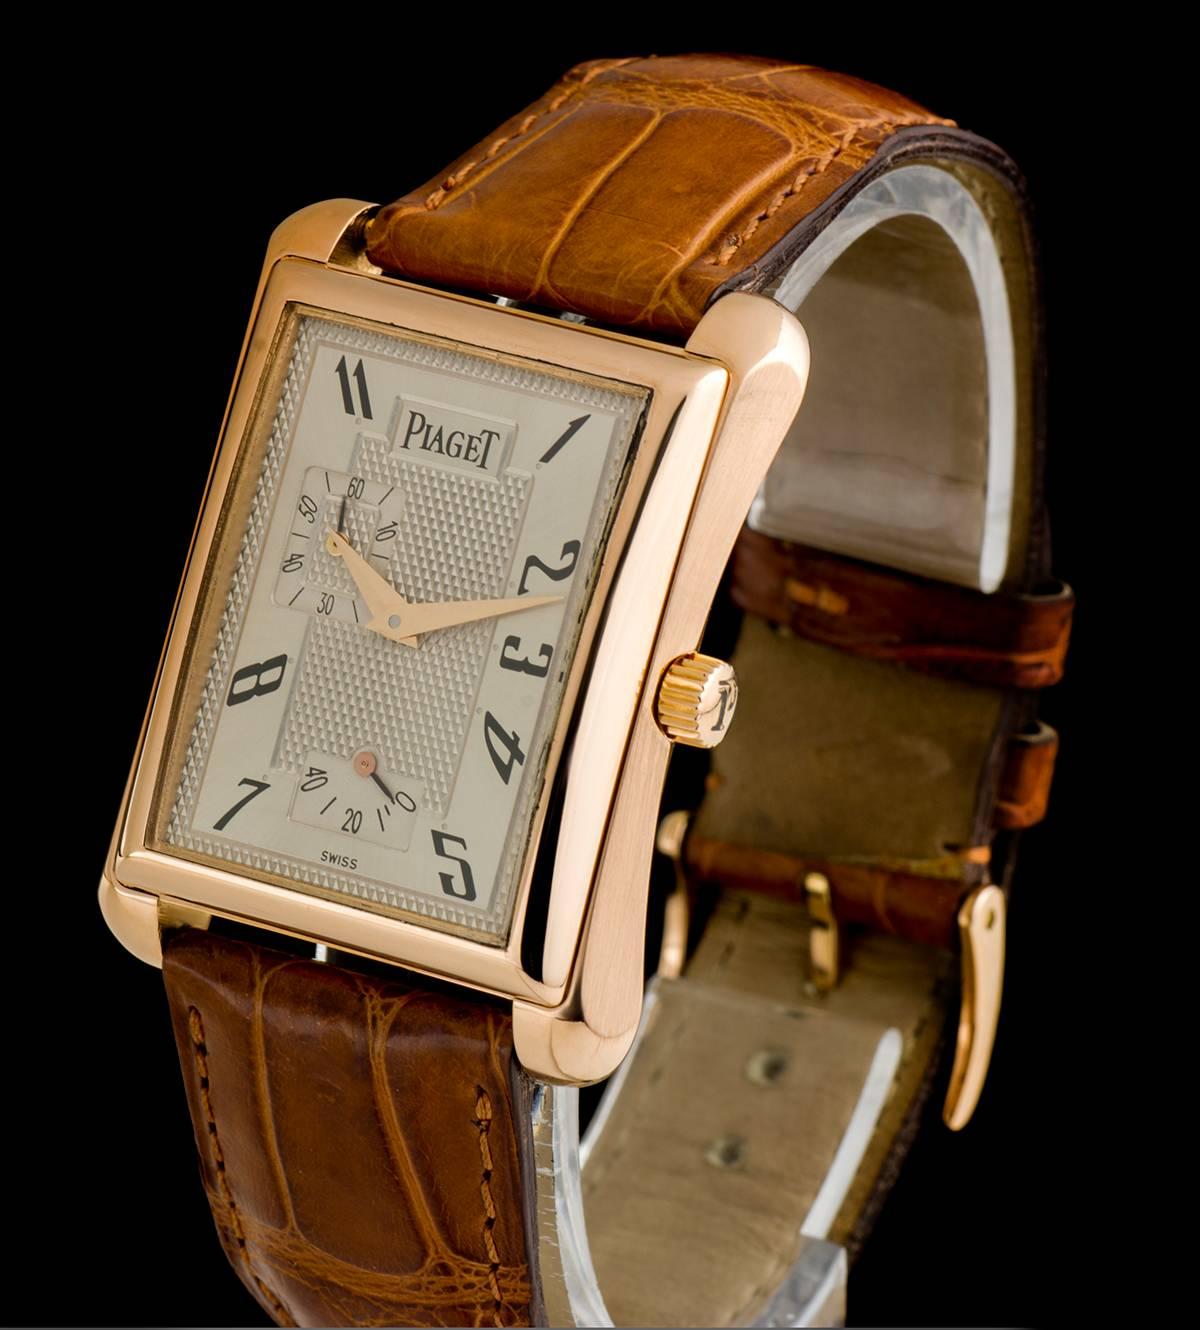 An 18k Rose Gold Emperador Power Reserve Gents Wristwatch, silver dial with arabic numbers, power reserve display at 6 0'clock, small seconds at 9 0'clock, a fixed 18k rose gold bezel, an original brown leather strap with an original 18k rose gold